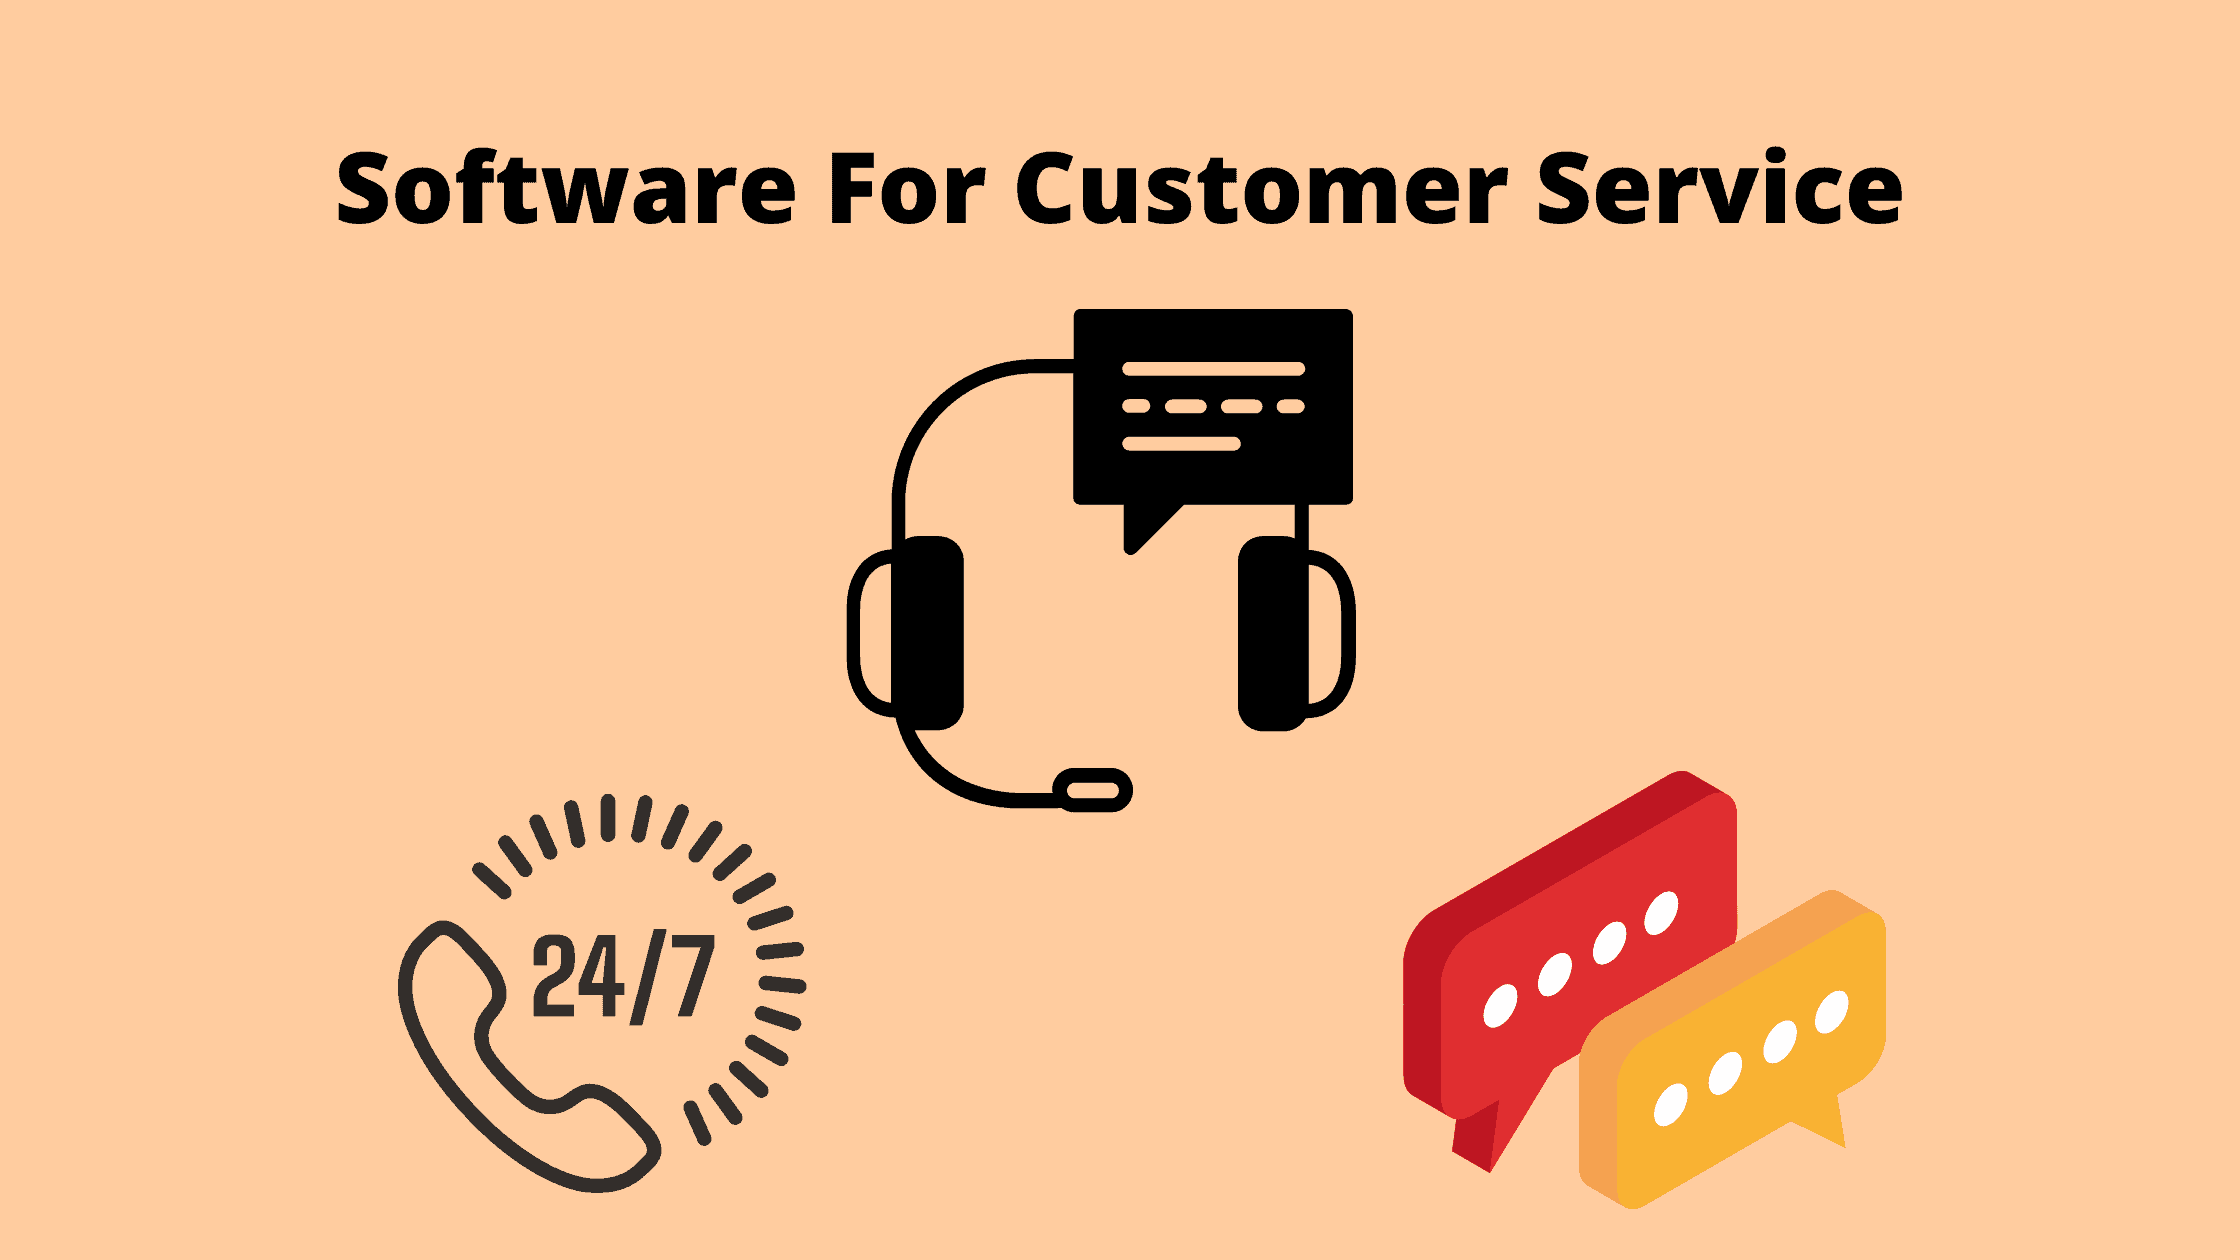 Software For Customer Service